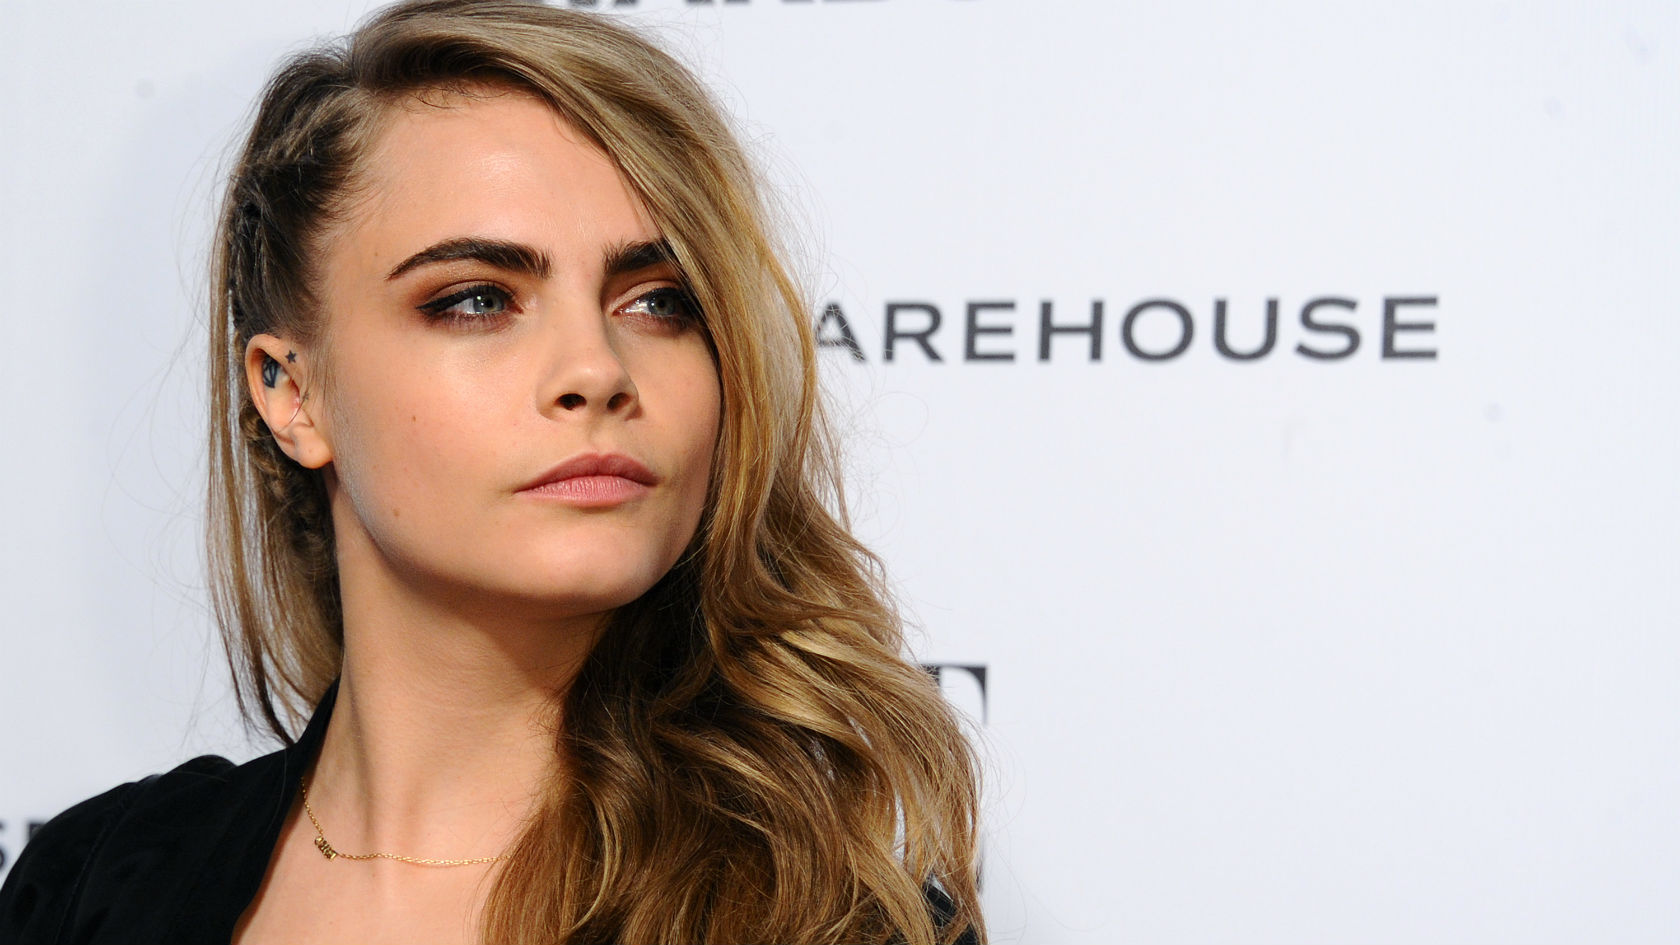 Cara Delevingne Shows Off Her Lady Garden For A Good Cause